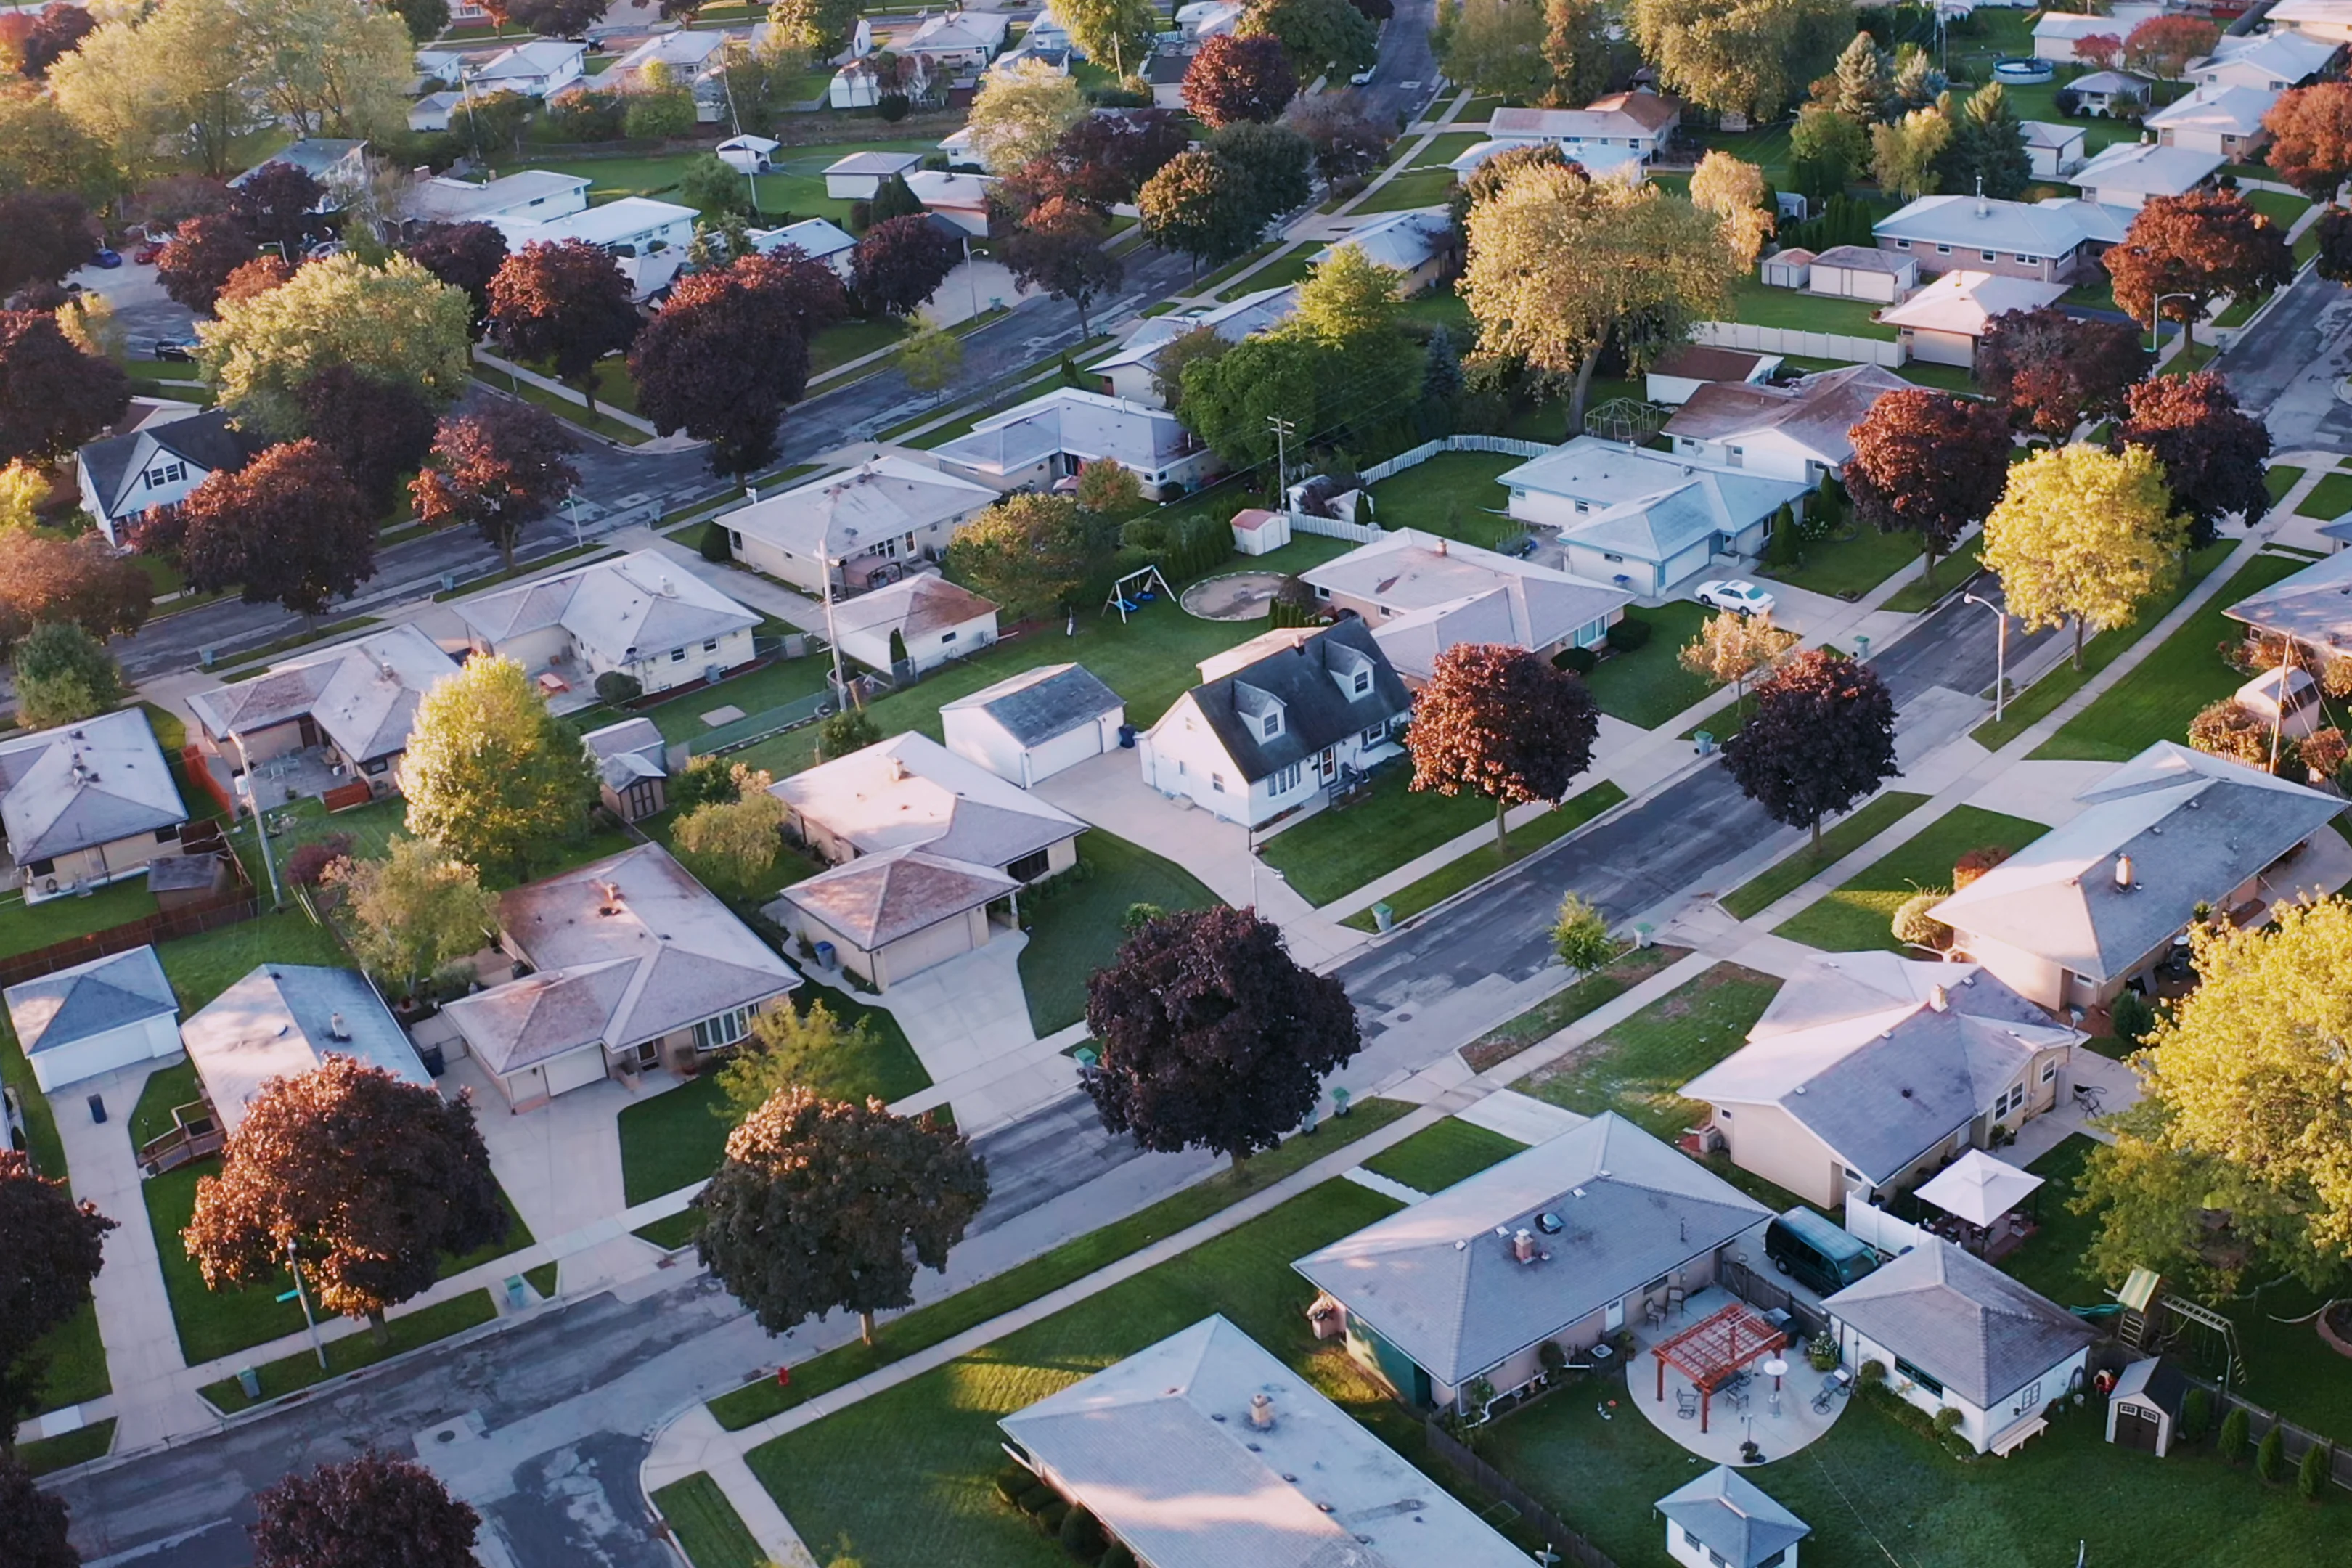 Sky view of homes with yards